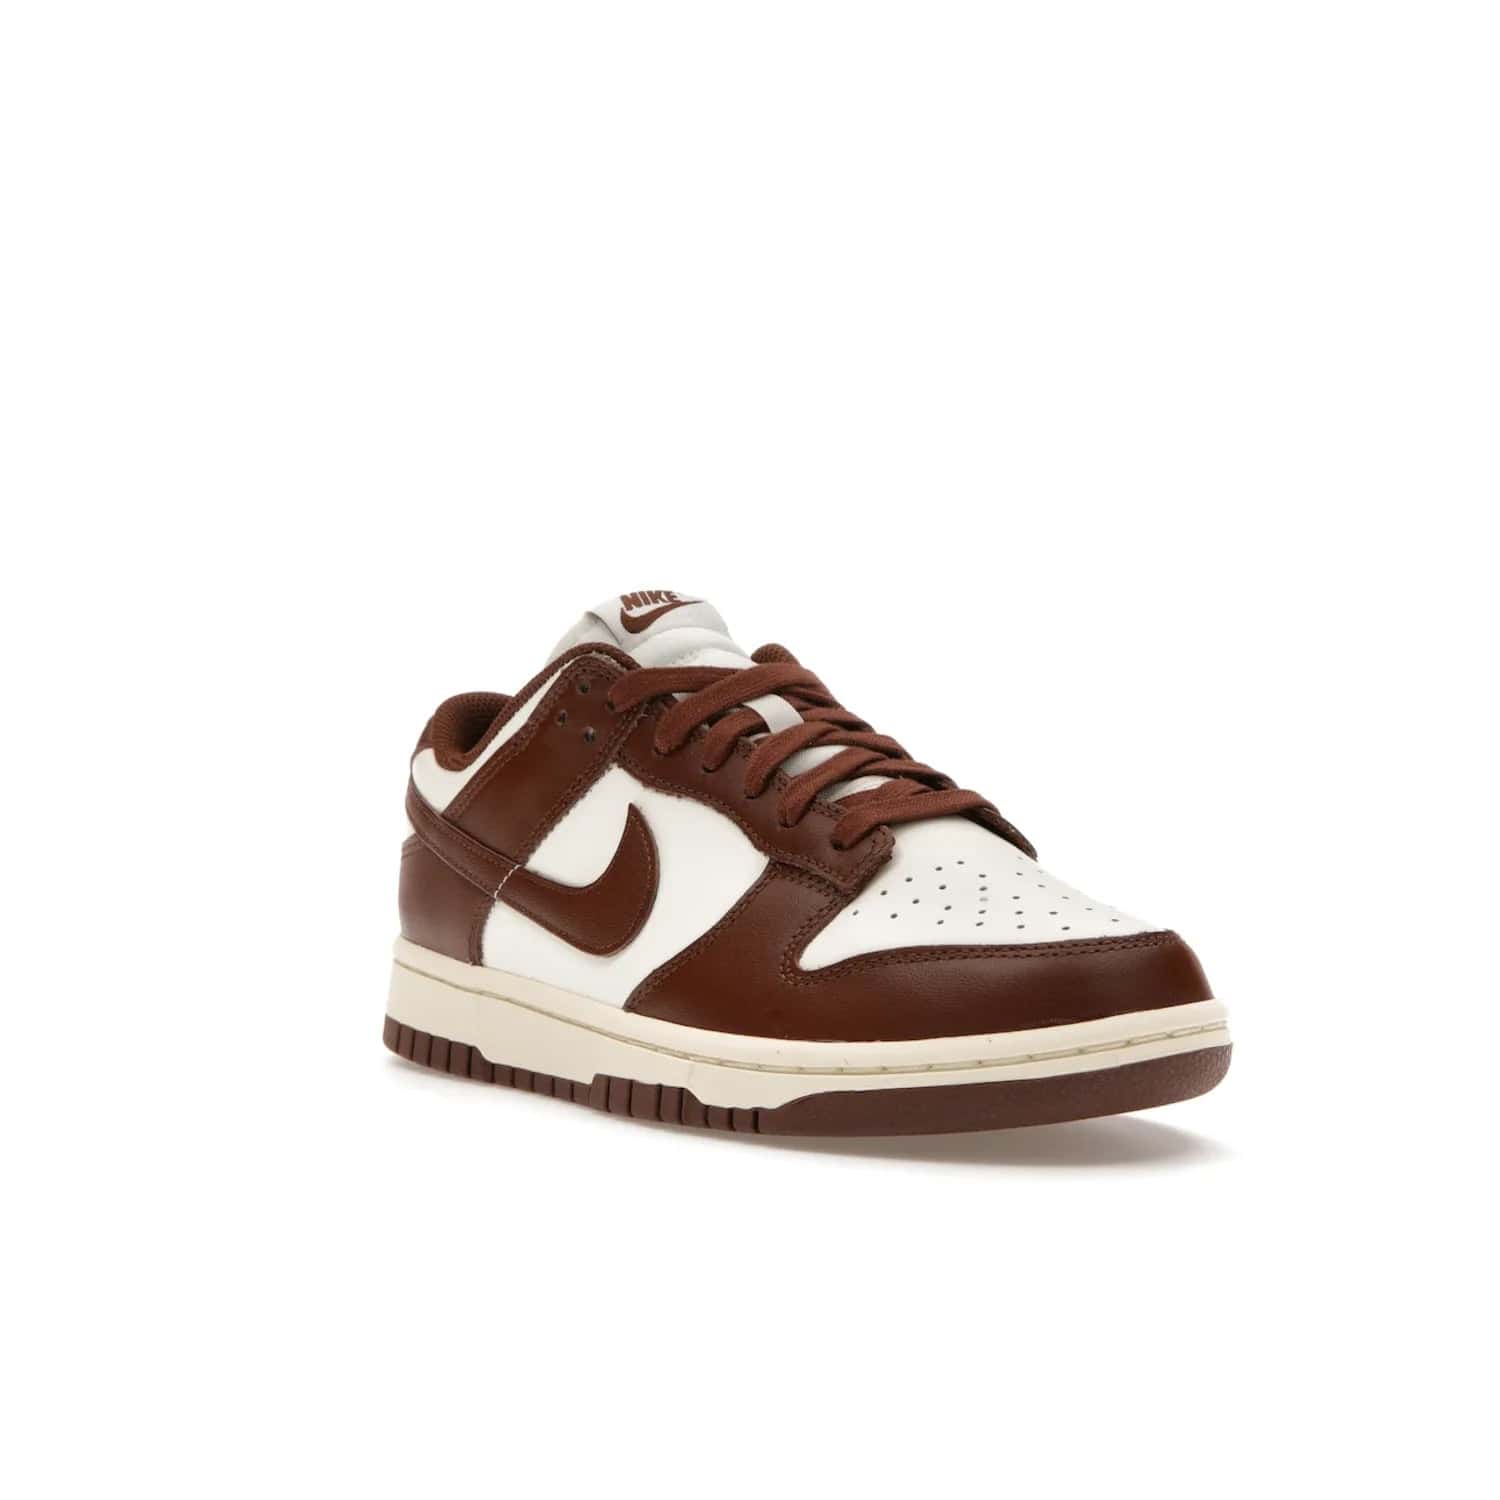 Nike Dunk Low Cacao Wow (Women's) - Image 6 - Only at www.BallersClubKickz.com - Revised
Get the Nike Dunk Low Cacao Wow and make a statement! Plush leather and a cool Cacao Wow finish bring together a unique mix of comfort and fashion that will turn heads. Boosted with a Coconut Milk hue. Shop today.